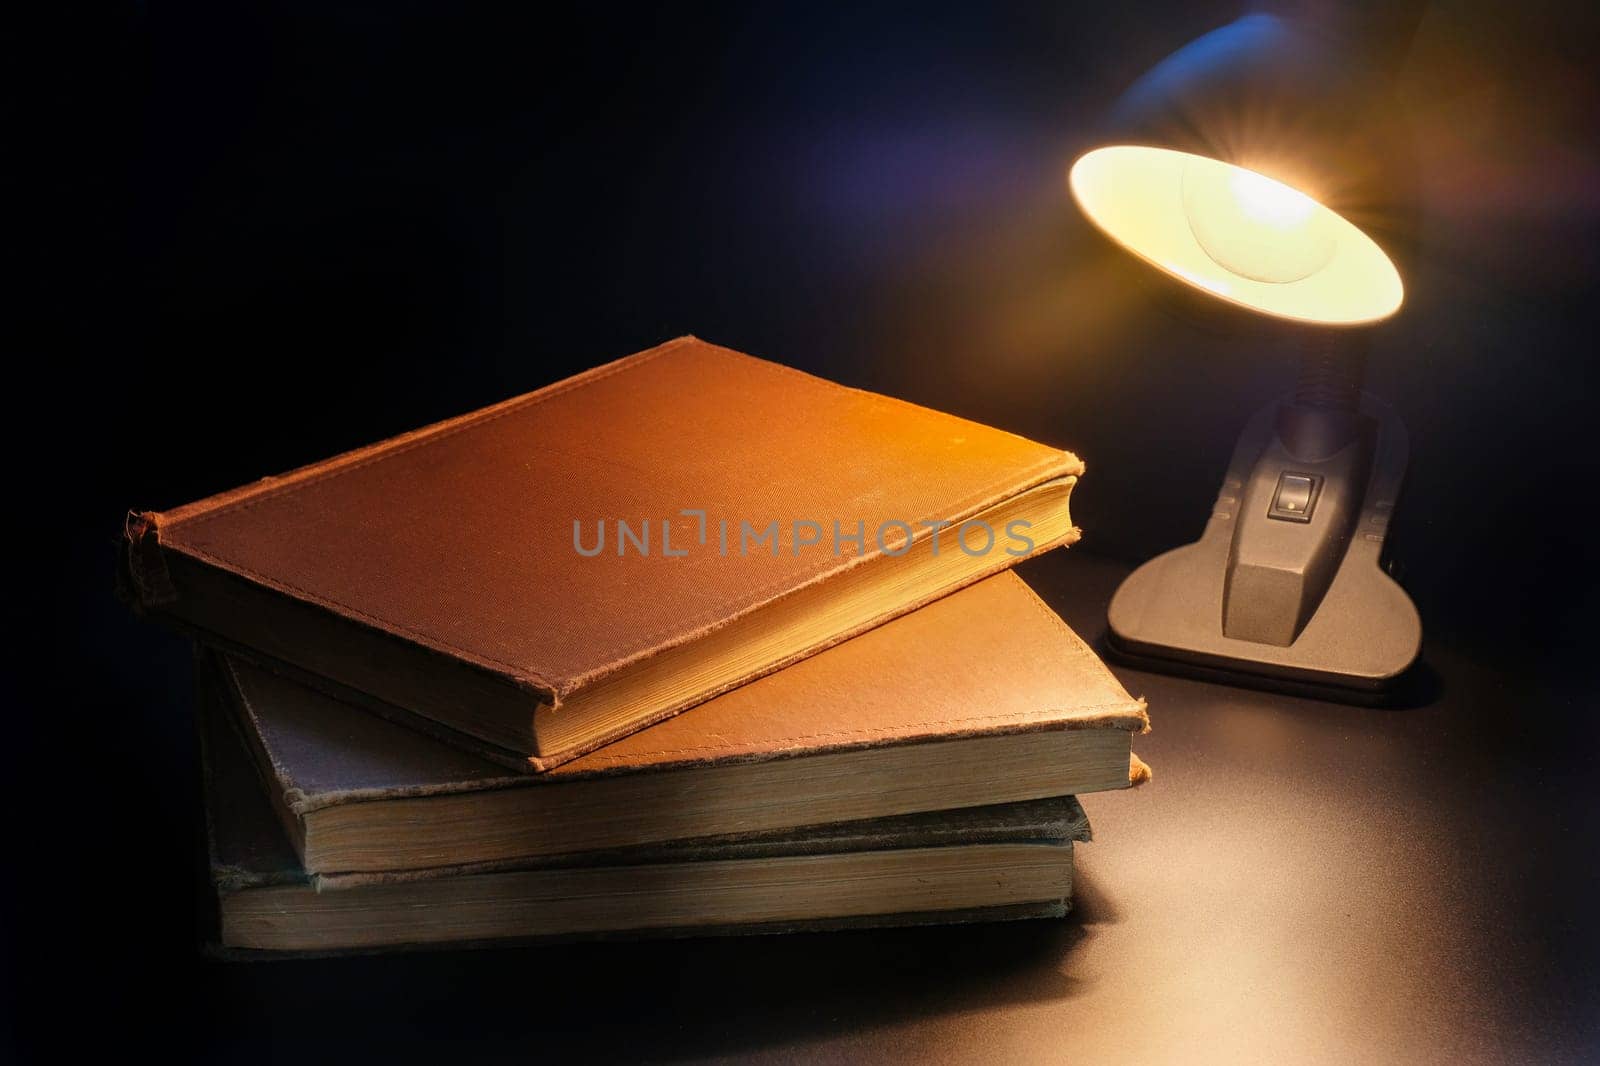 Table lamp lighting books on the table. Education concept.